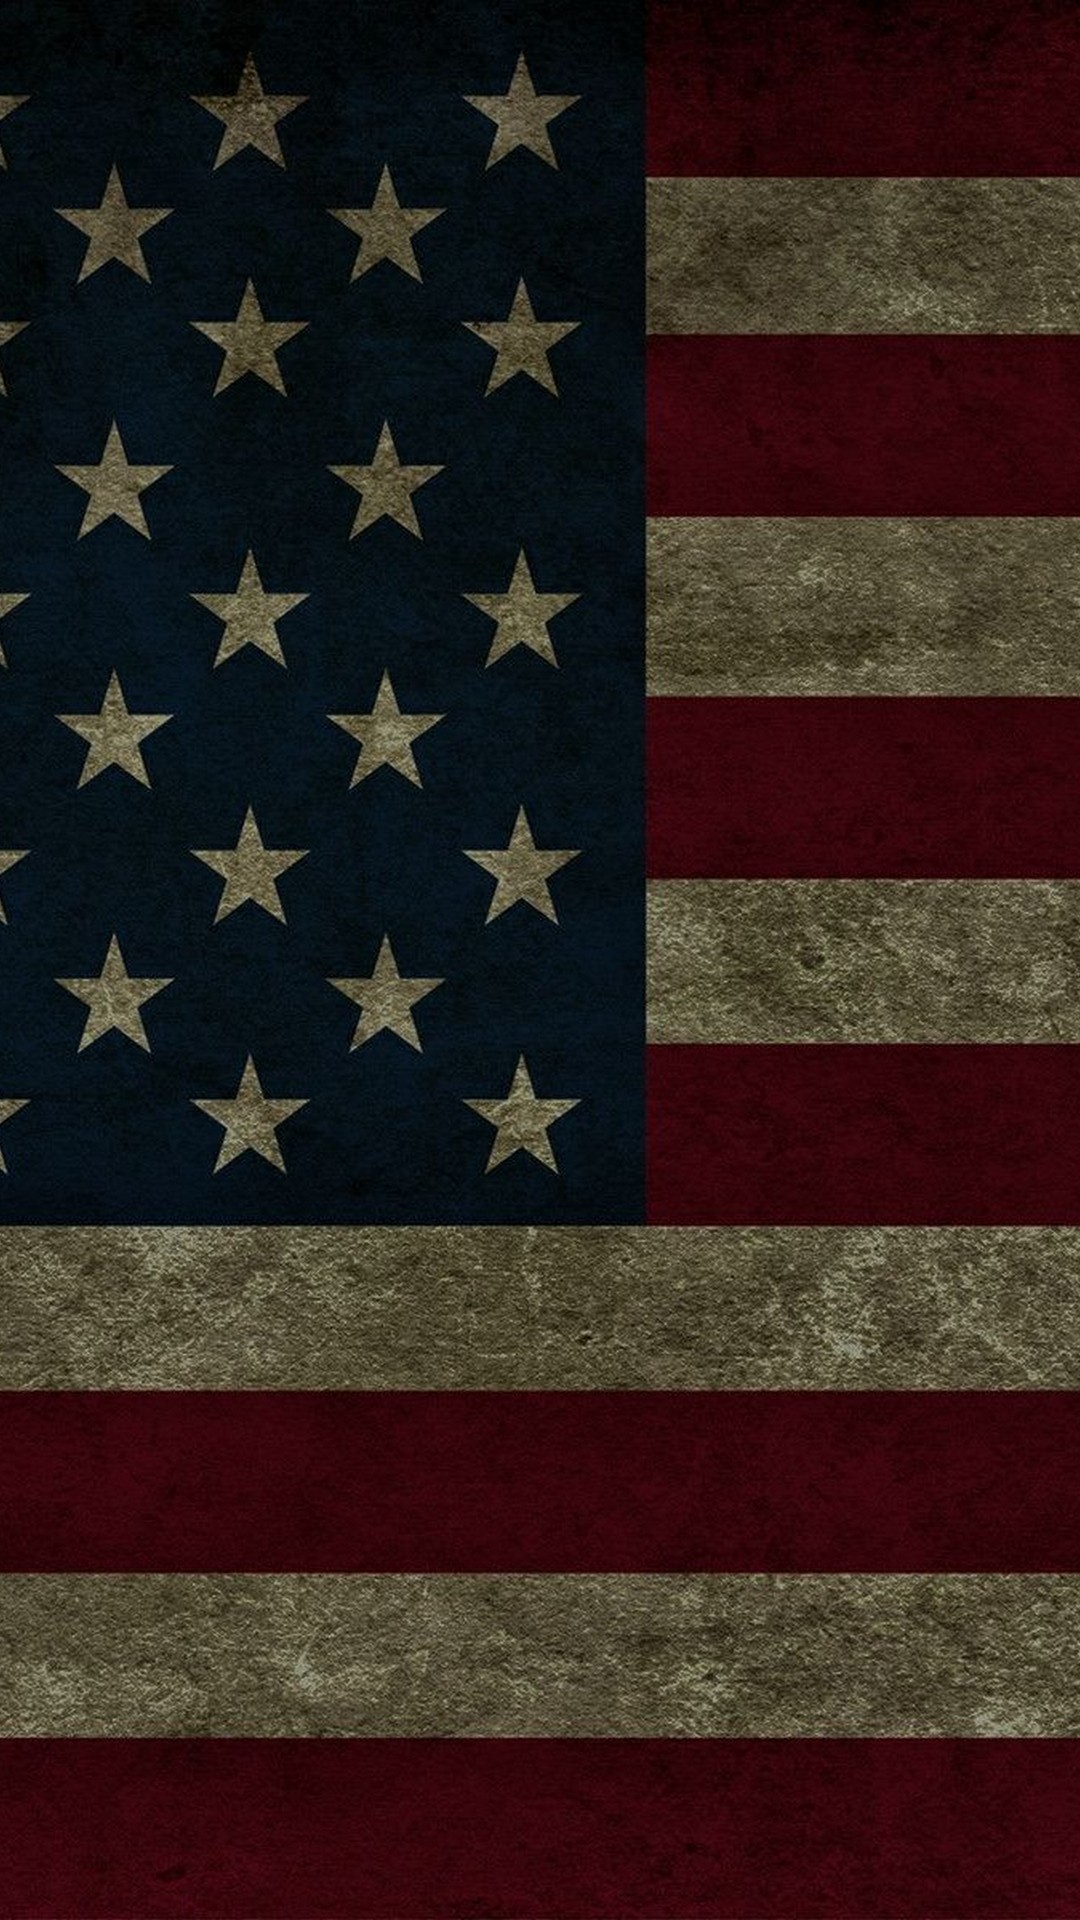 Wallpaper Android American Flag With high-resolution 1080X1920 pixel. You can use this wallpaper for your Android backgrounds, Tablet, Samsung Screensavers, Mobile Phone Lock Screen and another Smartphones device